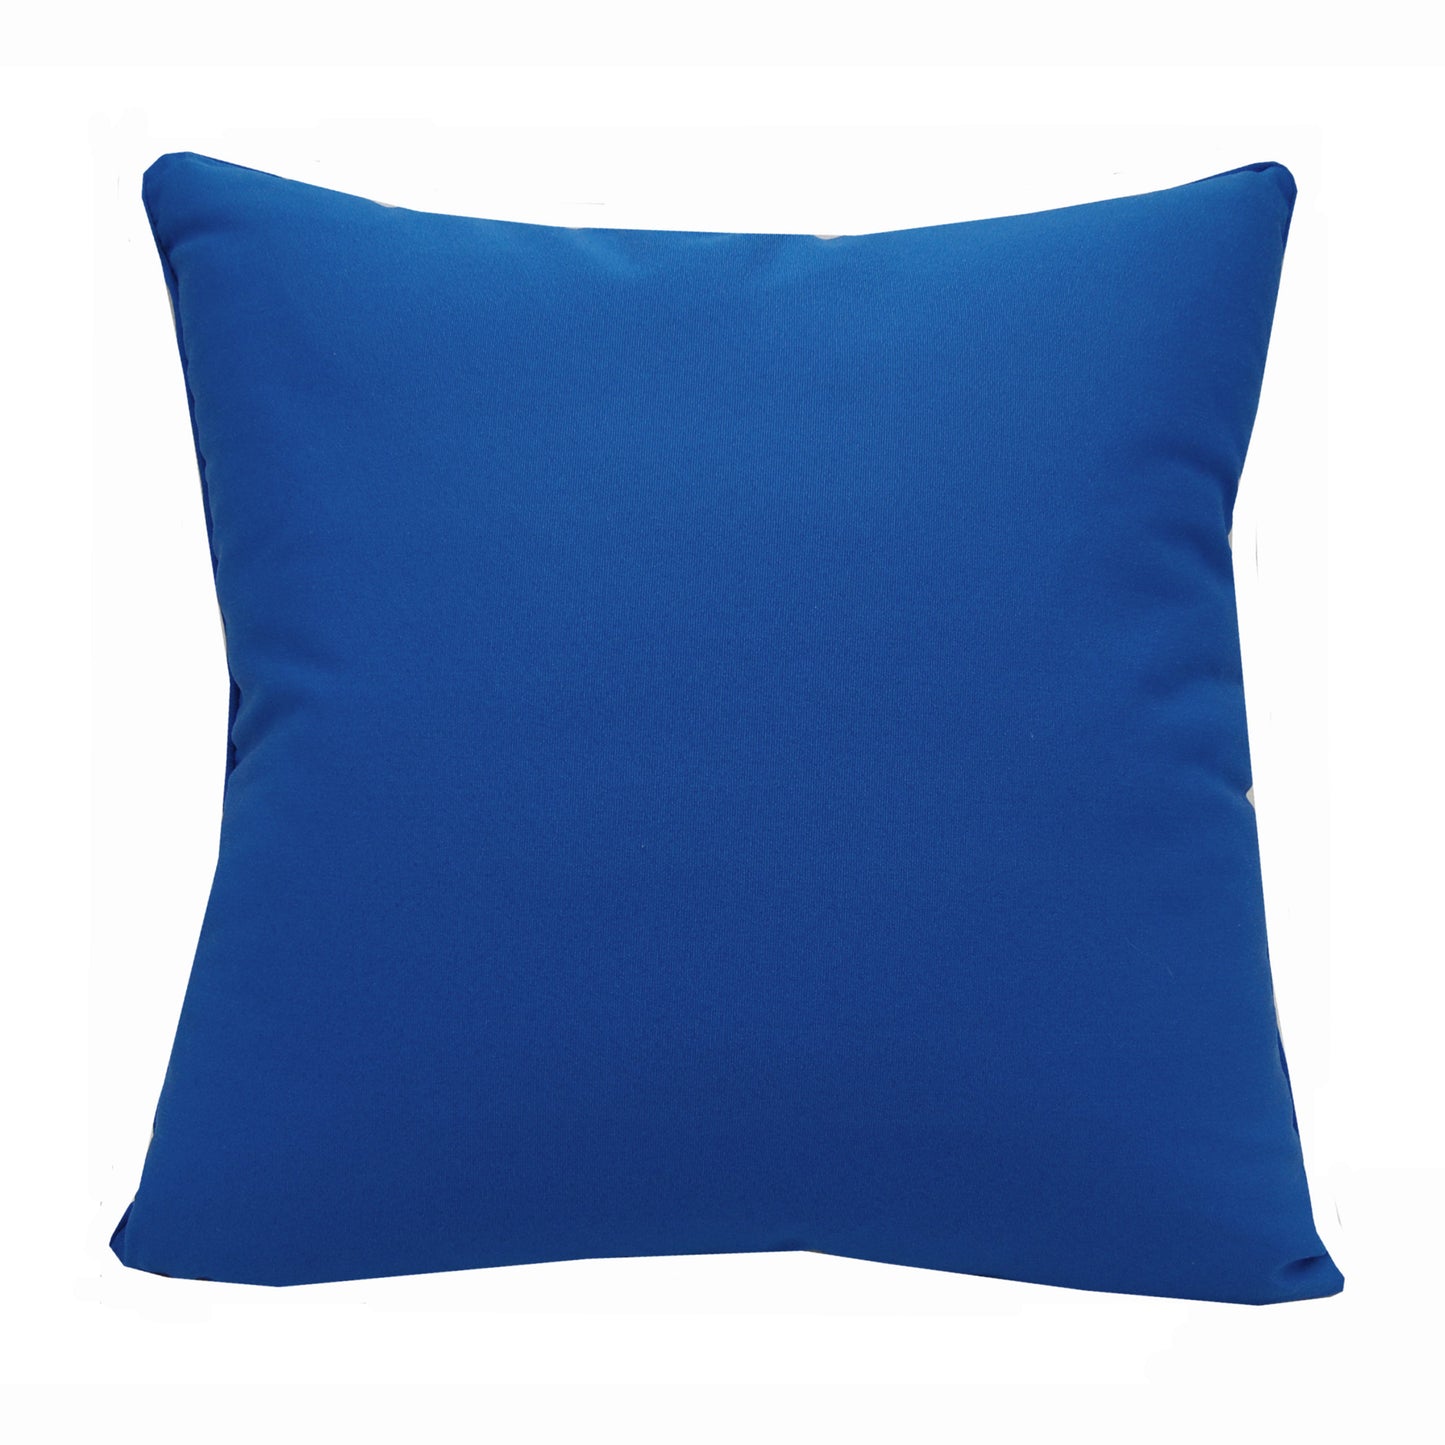 Solid blue fabric; back of the Fan Coral Navy and White Indoor Outdoor Pillow